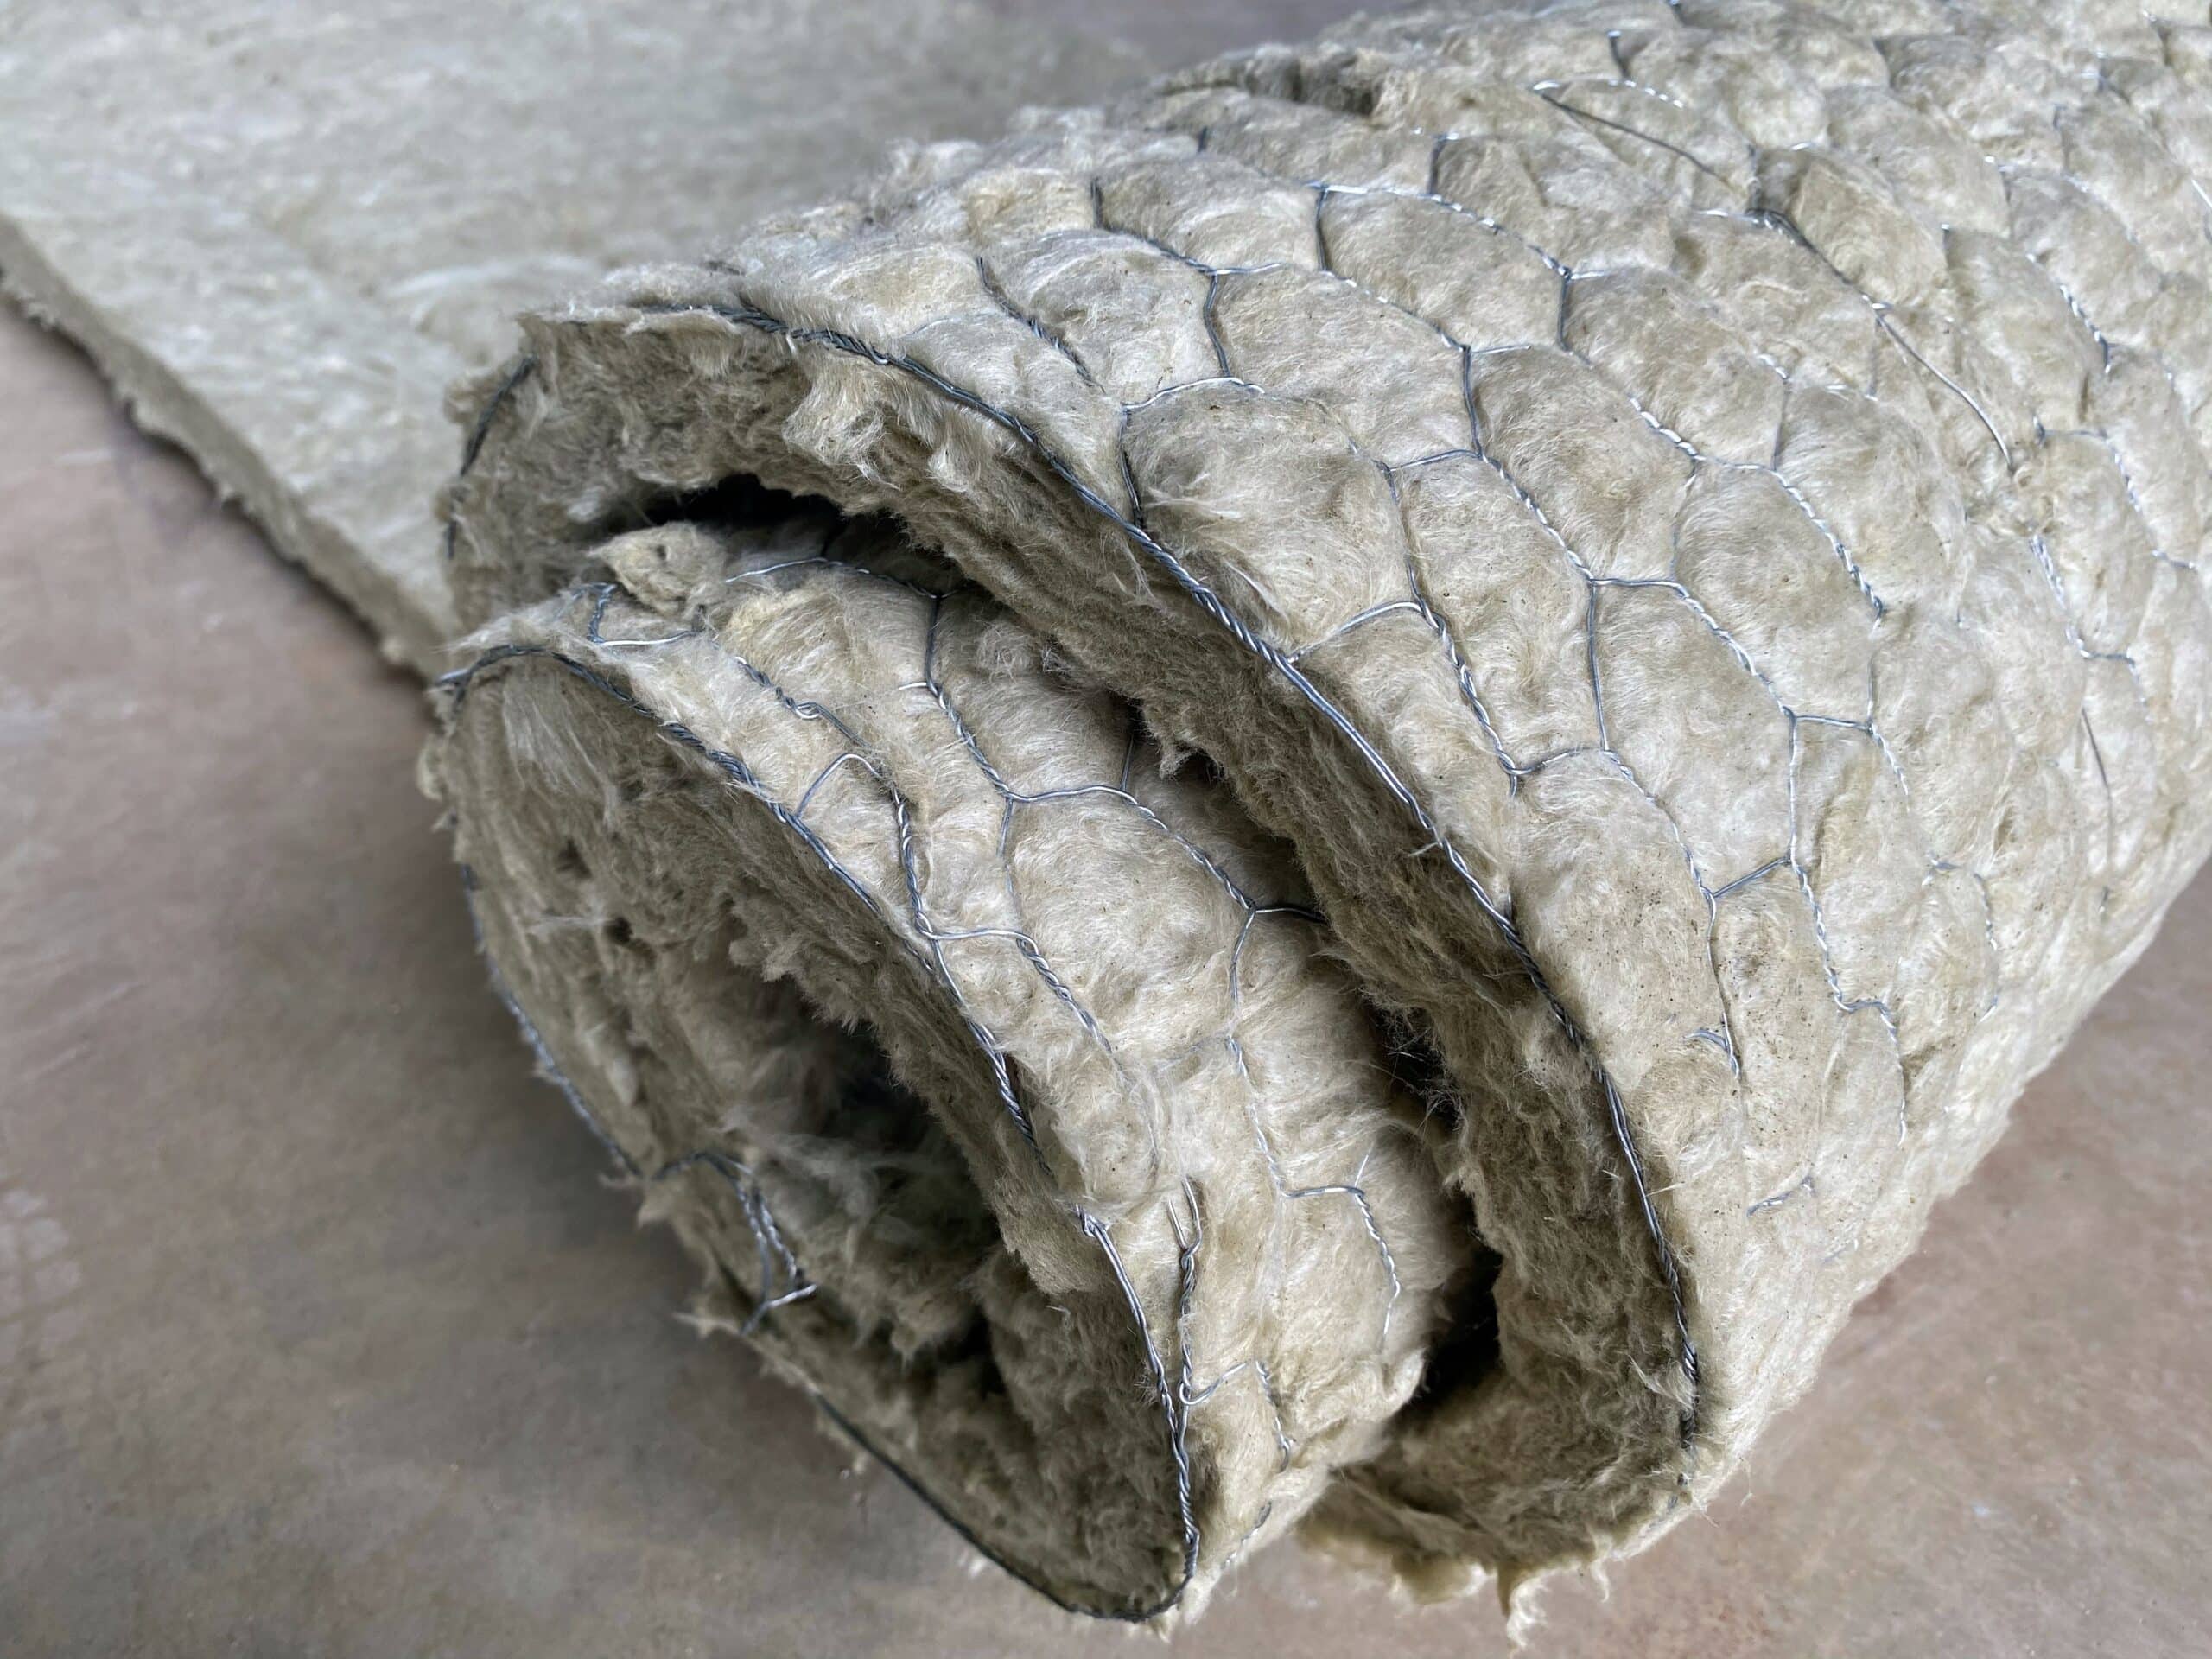 asbestos insulation for pipe heat insulation syste 2022 11 16 19 40 58 utc